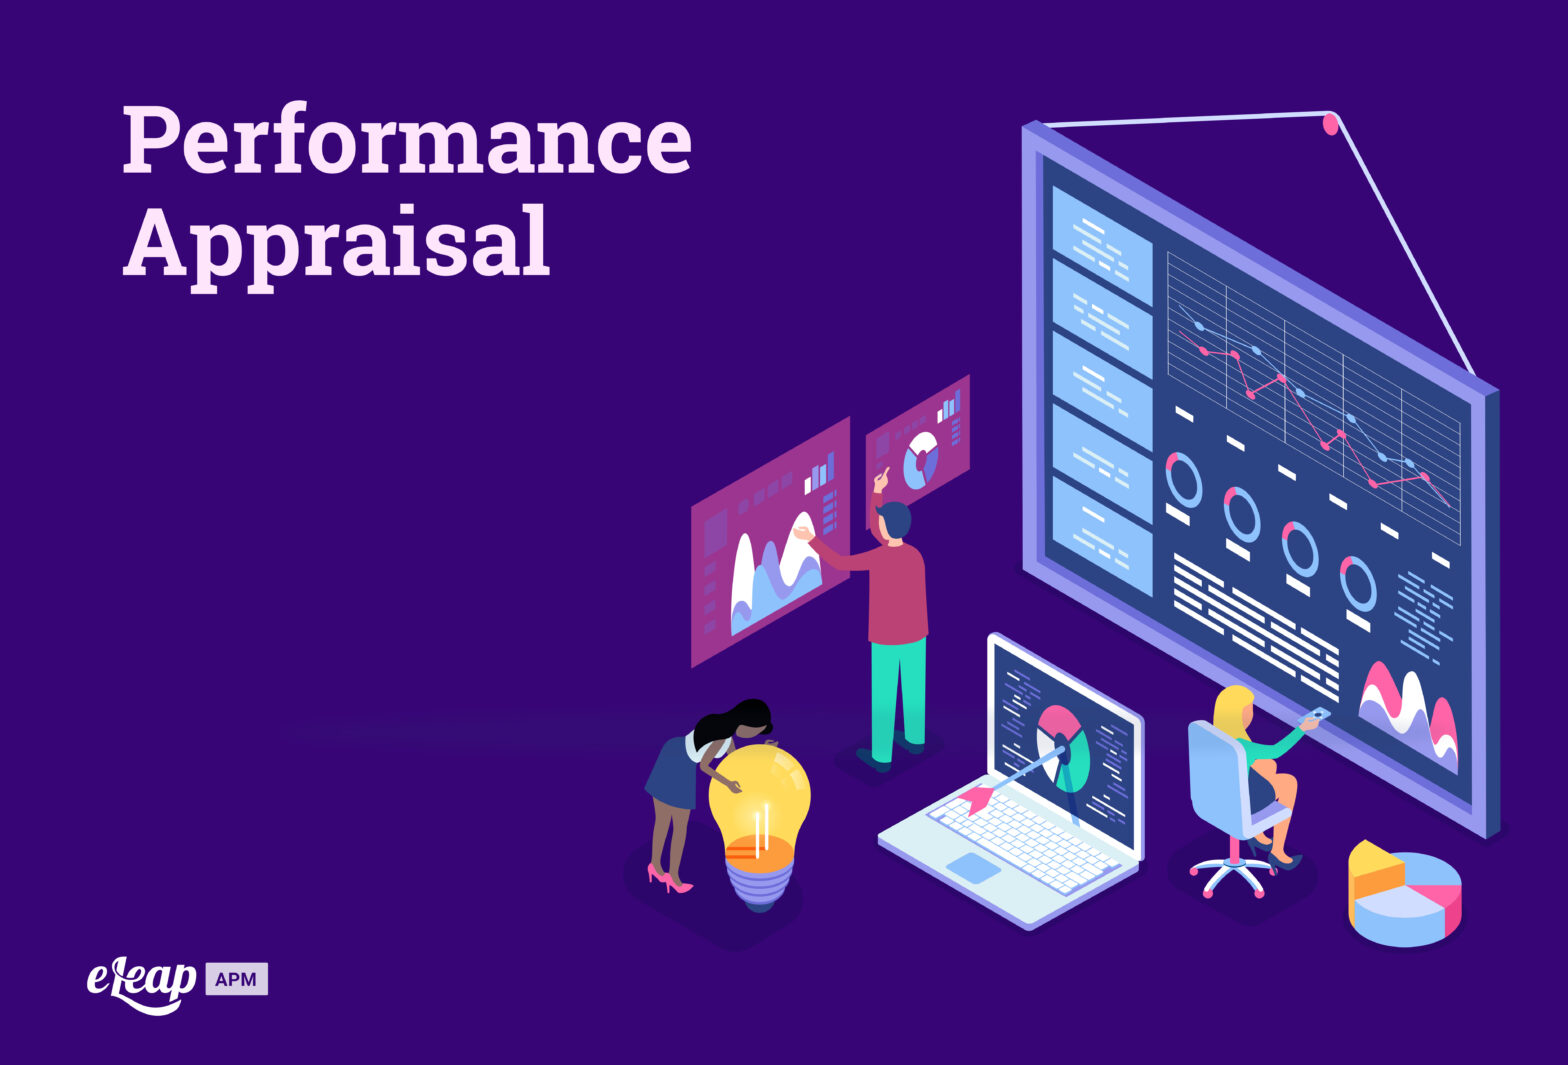 Performance Appraisal A Guide for Managers and Leaders